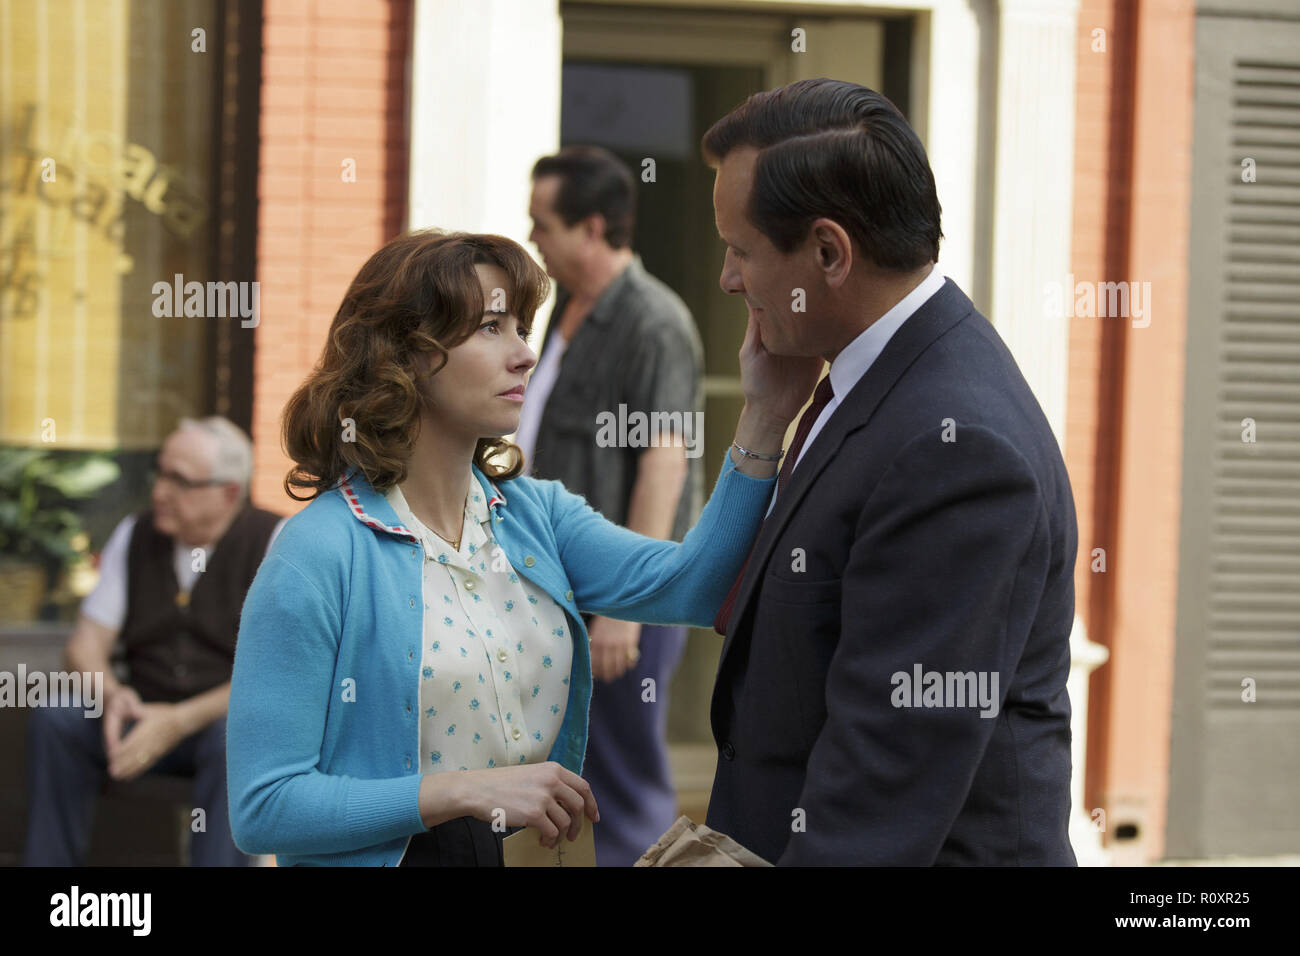 Linda Cardellini as Dolores Vallelonga and Viggo Mortensen as Tony Vallelonga in 'Green Book,' directed by Peter Farrelly. (2018) (Credit Photo: Universal Studios / The Hollywood Archive) Stock Photo